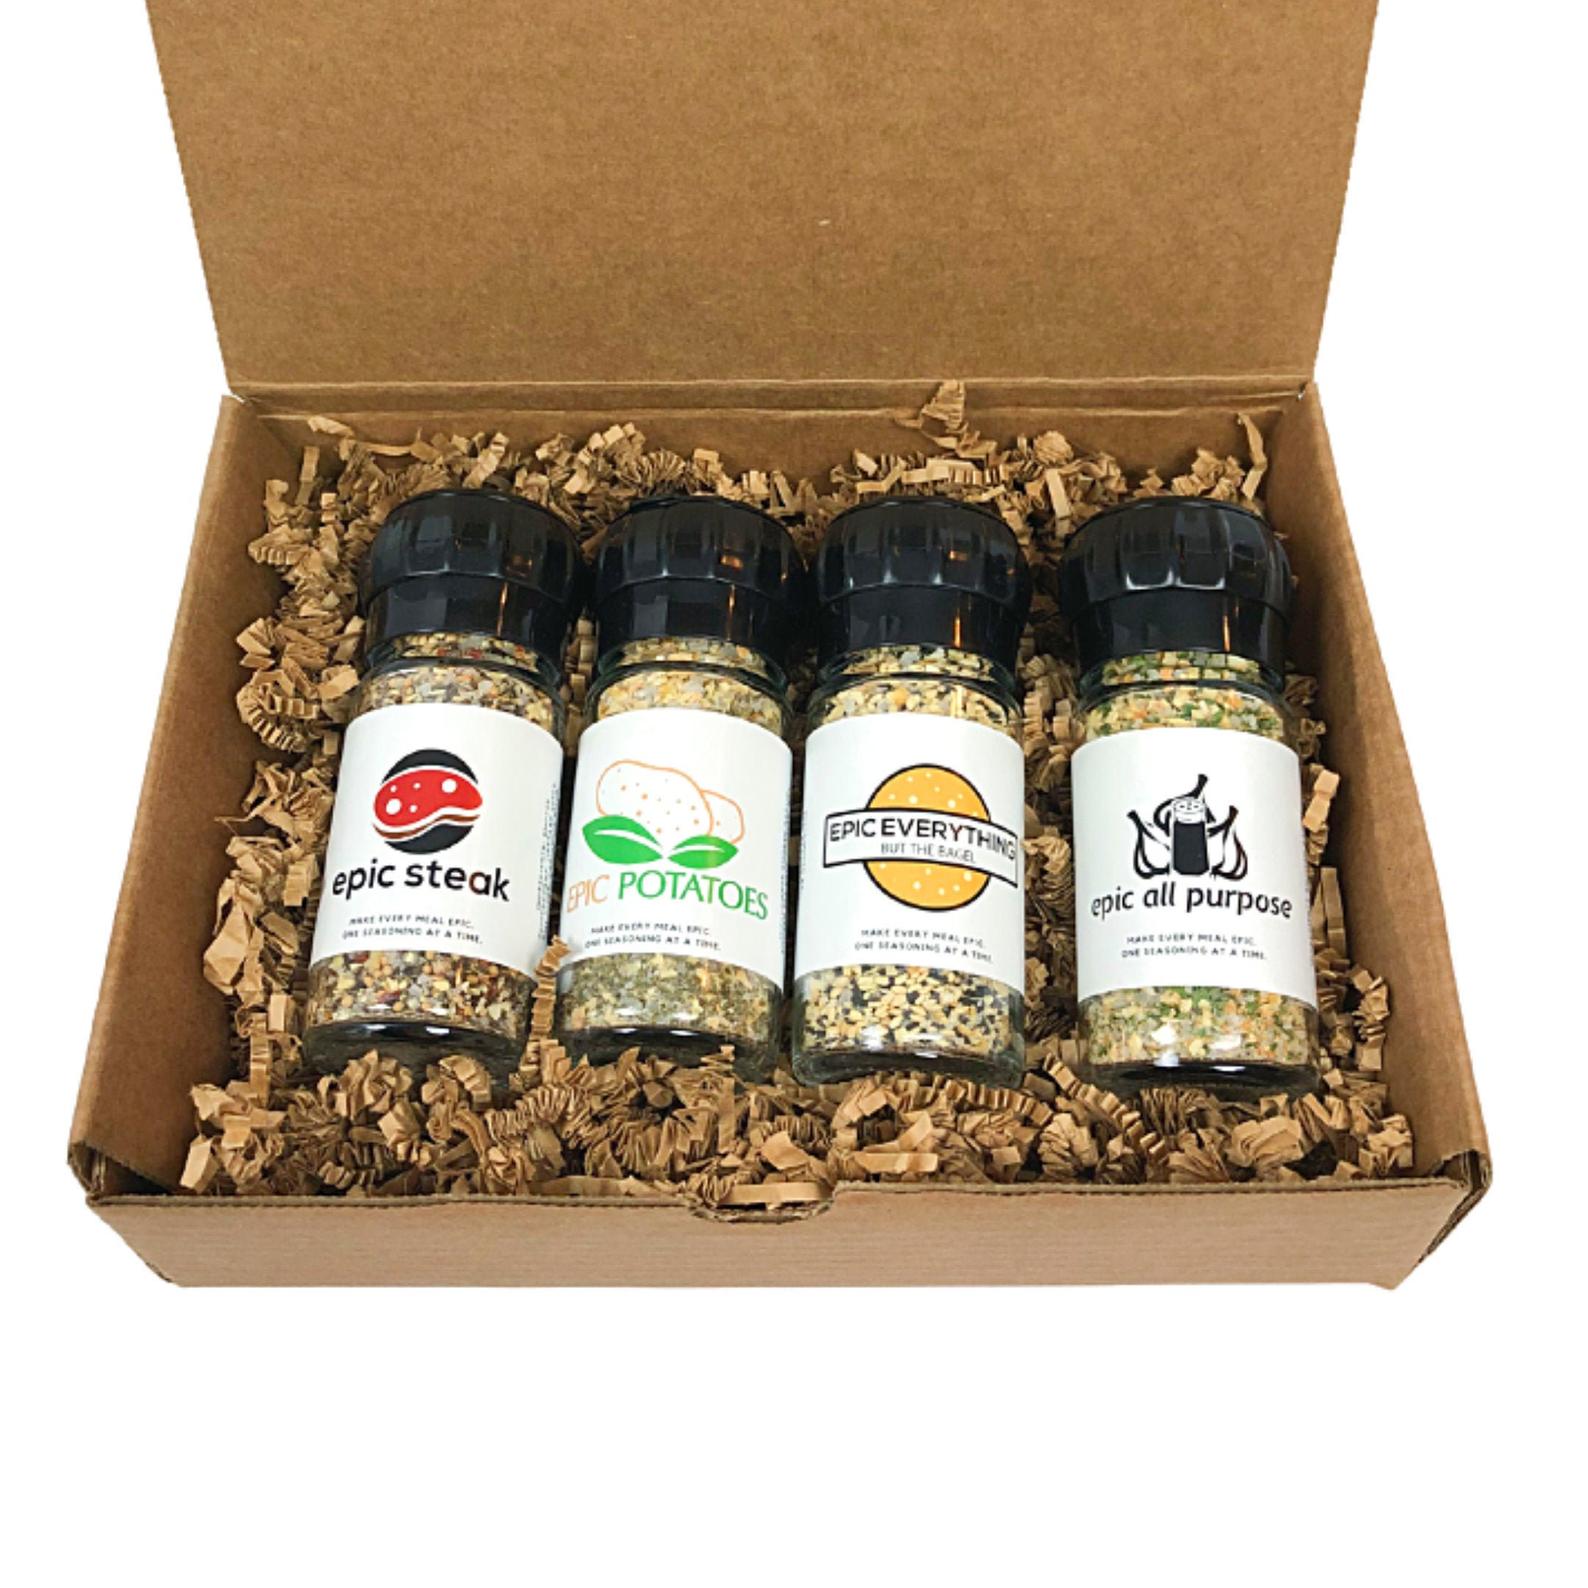 48 Essential Spices - The Complete Starter Spice Gift Set by iSpice– iSpice  You